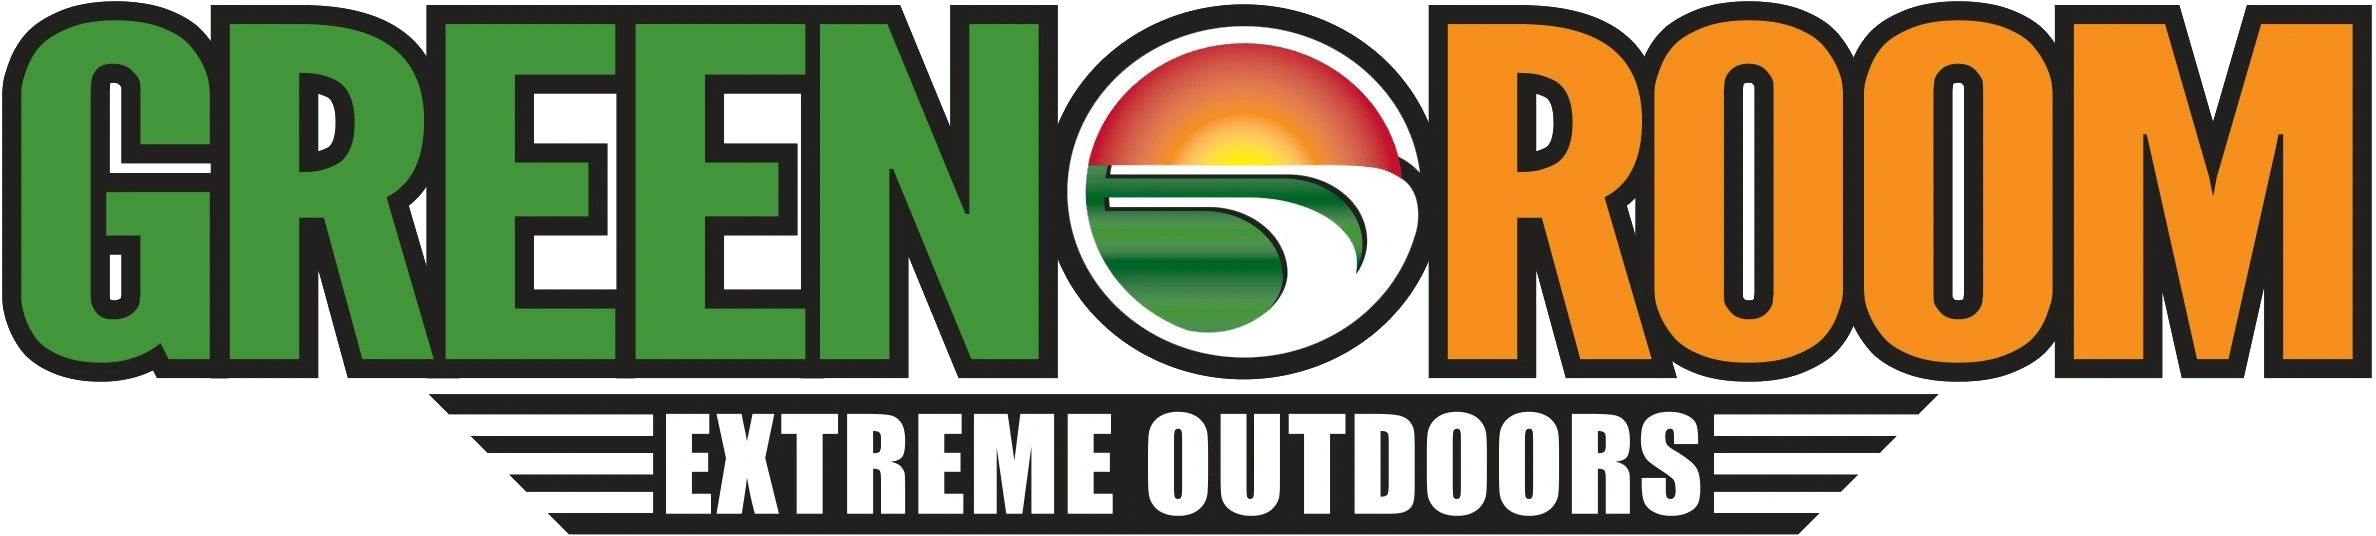 A logo for the outdoor store, no 5 extreme outdoors.